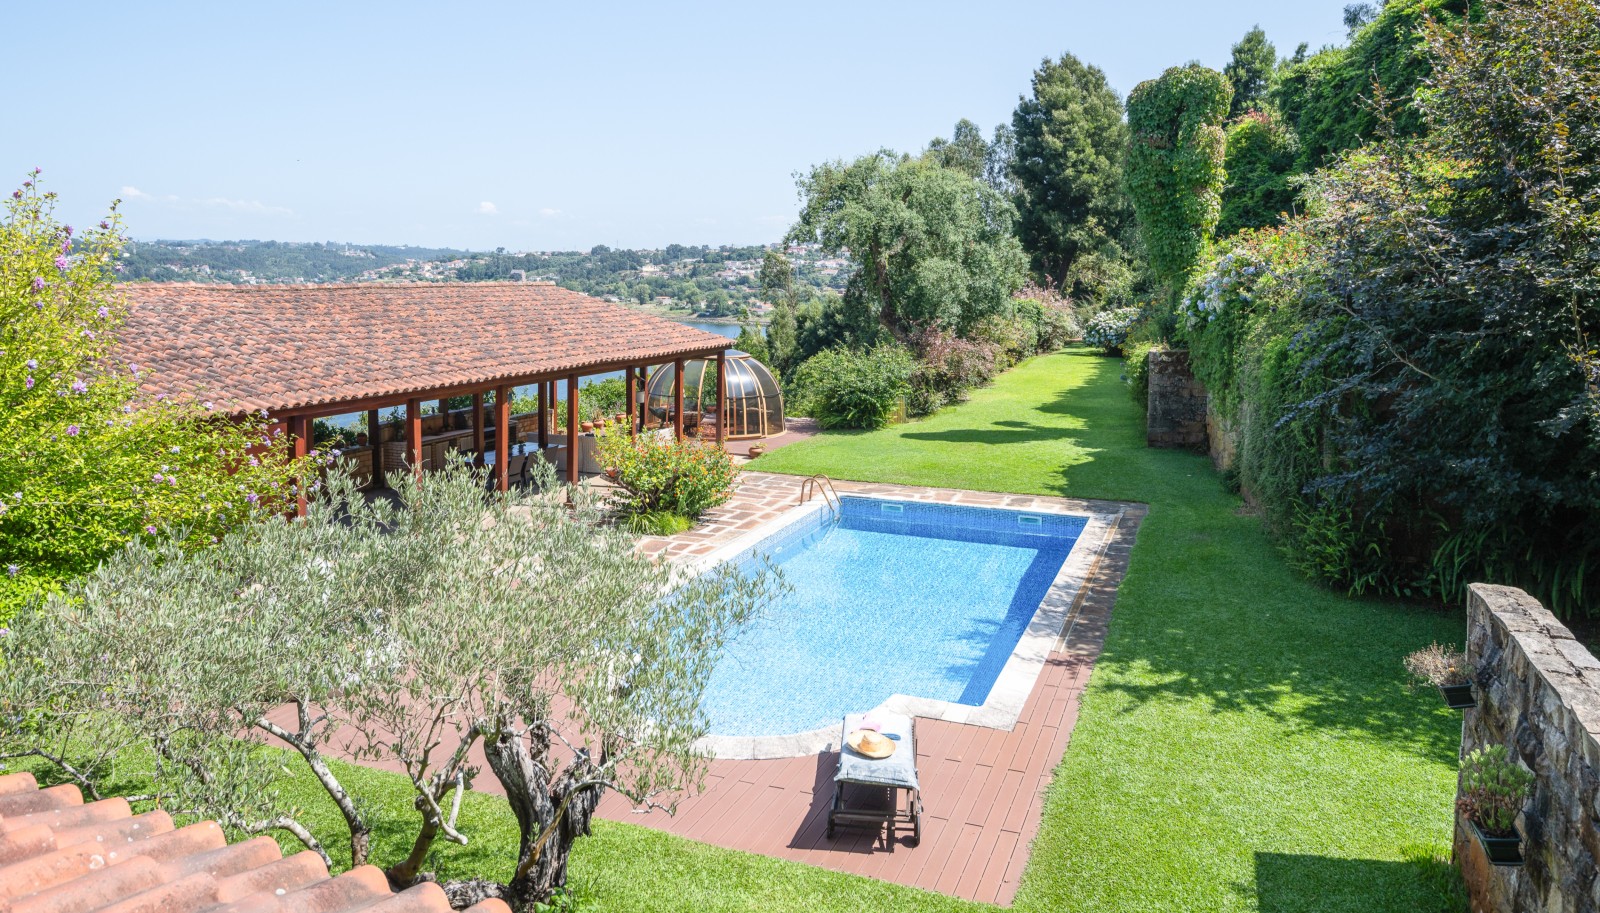 Property with gardens, swimming pool and river view, for sale, in V. N. Gaia, Portugal. N. Gaia, Portugal_239648